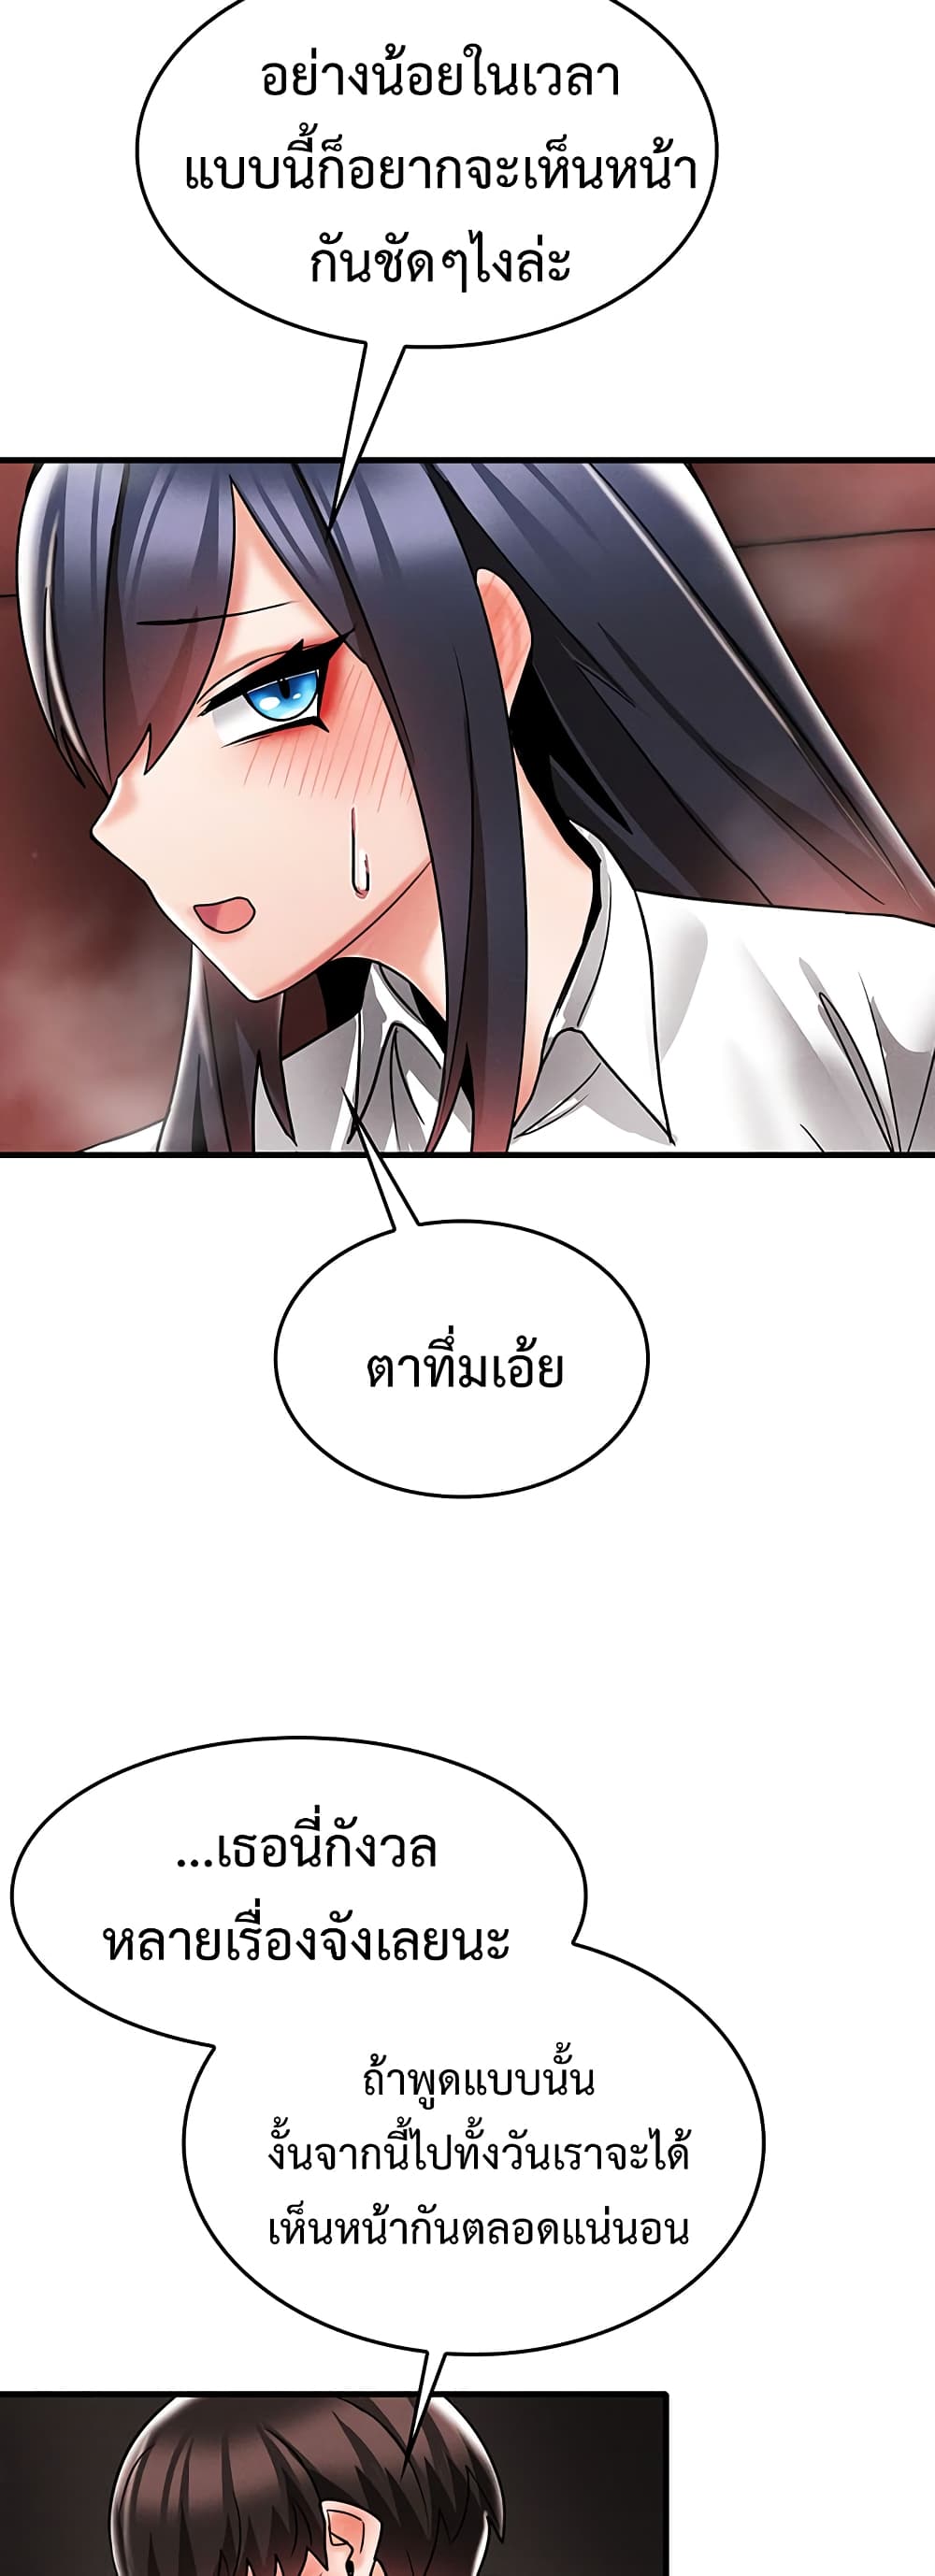 Relationship Reverse Button: Let’s Make Her Submissive 9 ภาพที่ 20